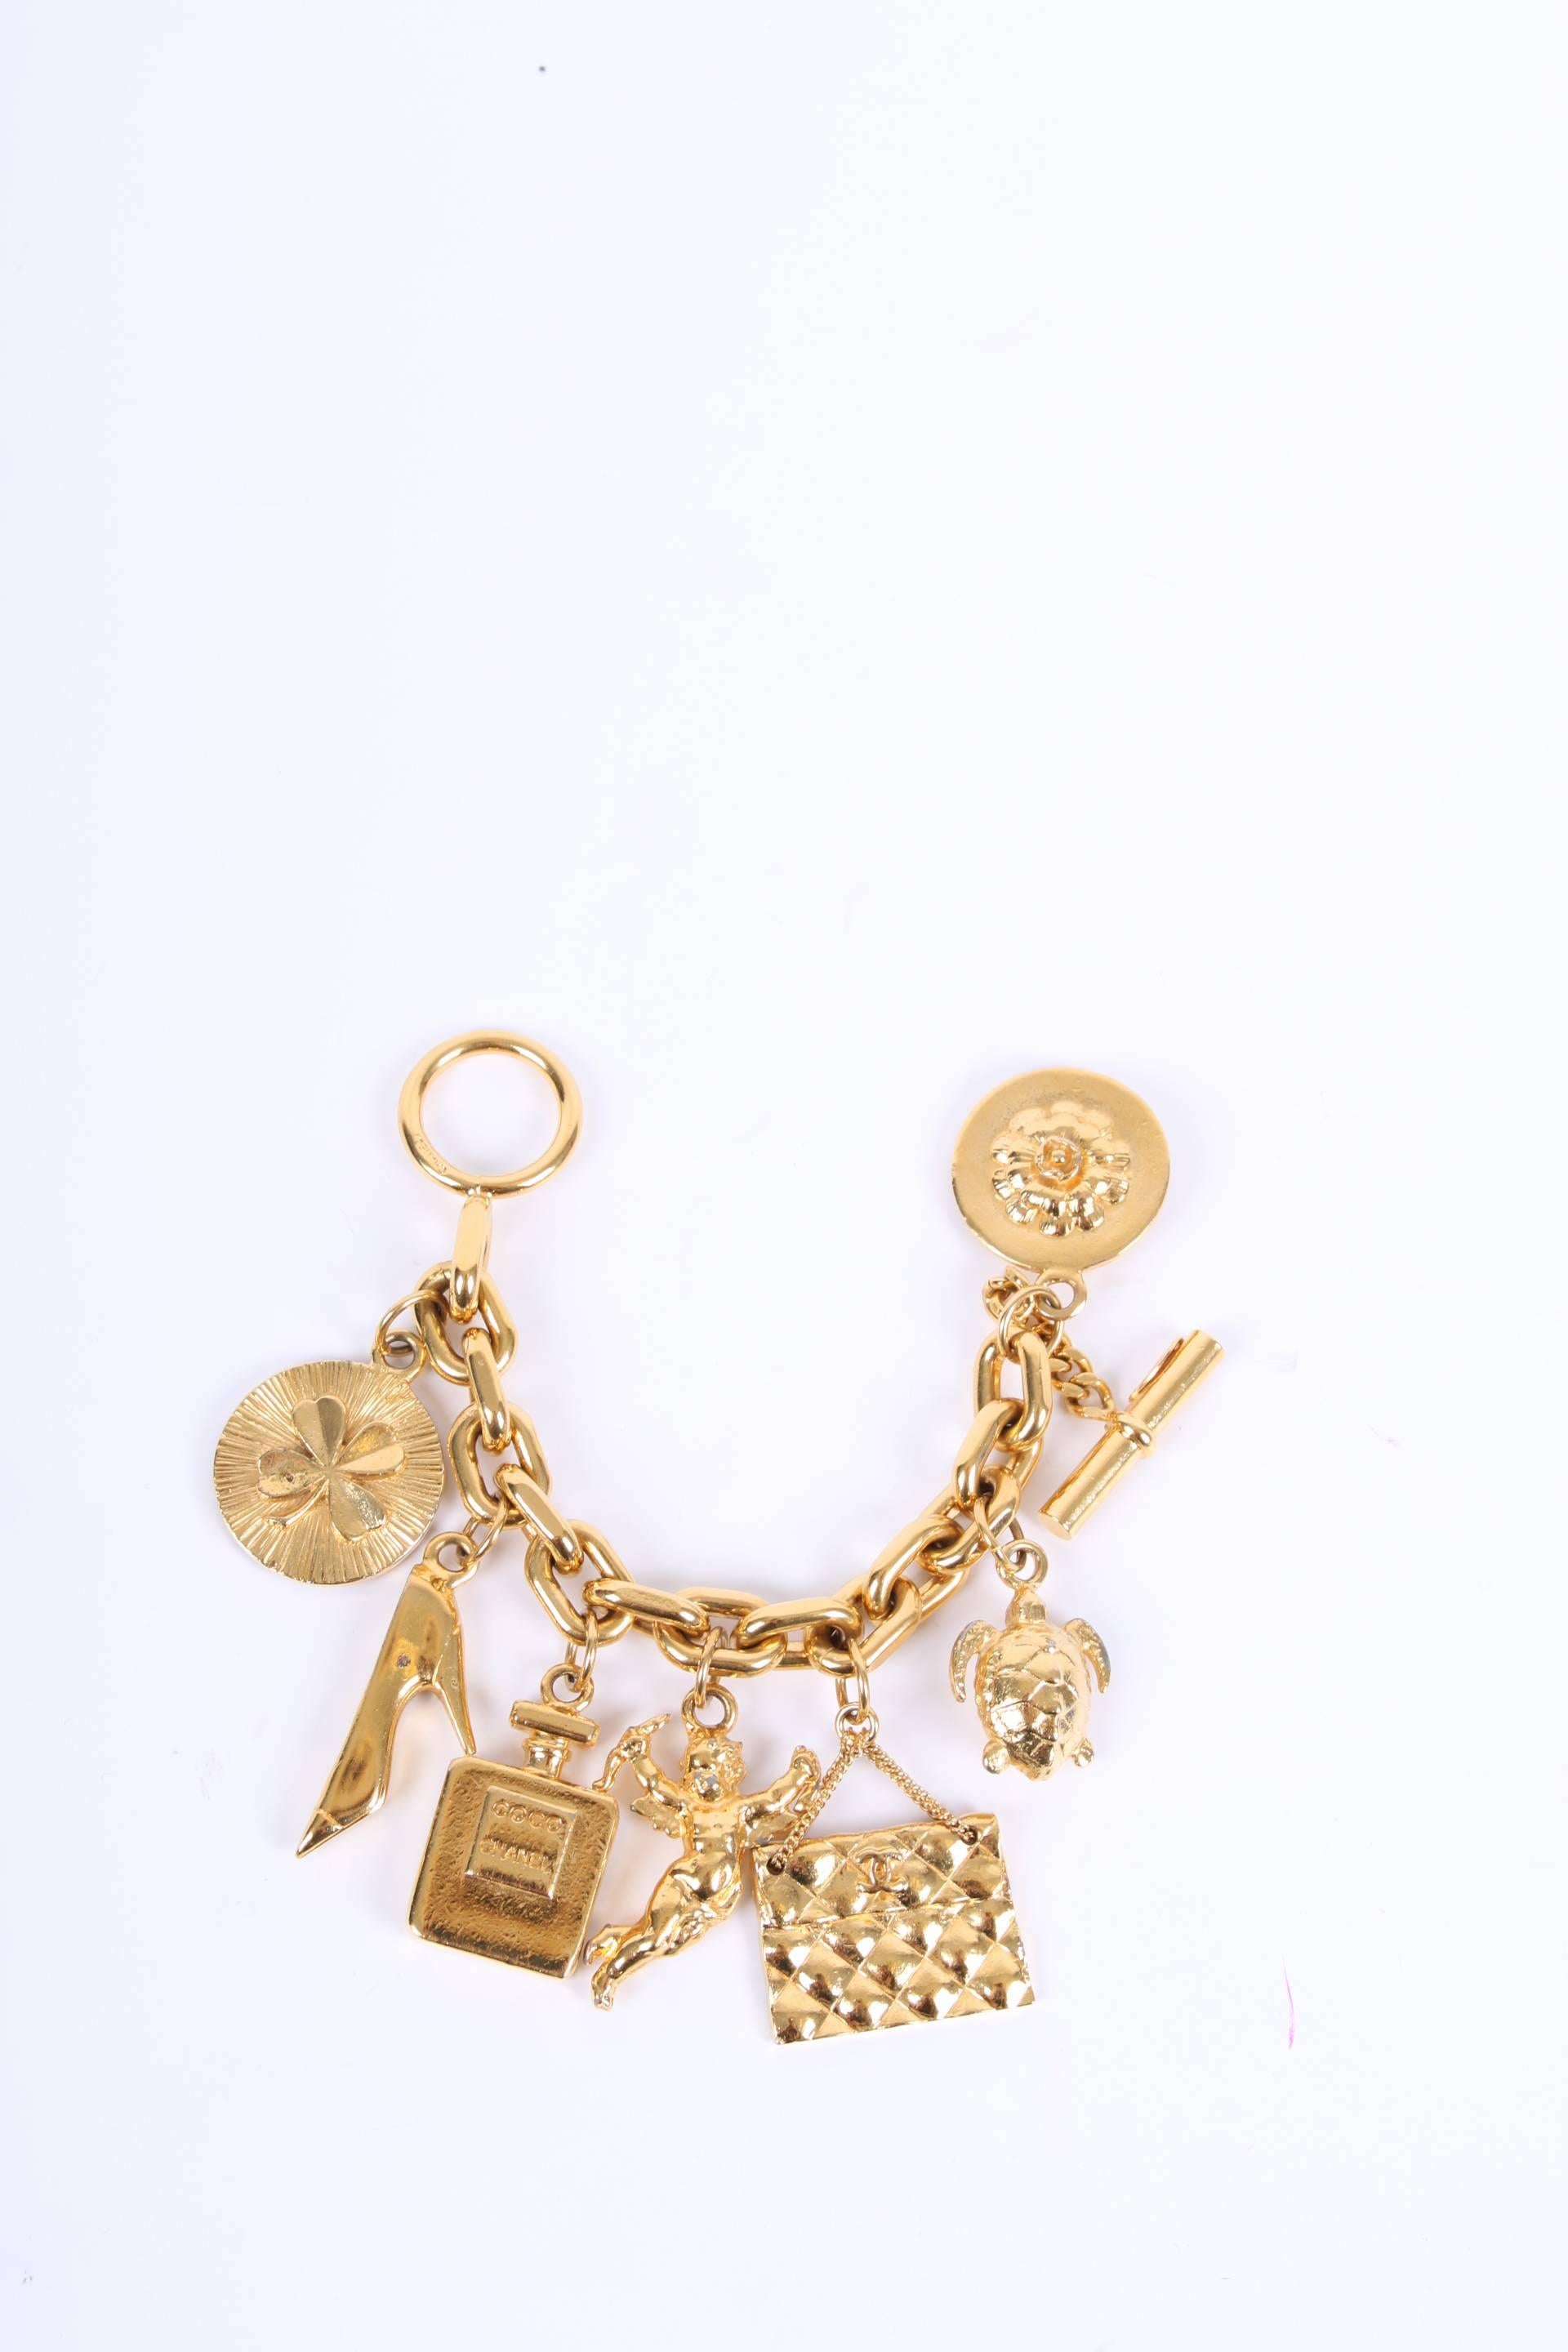 80's Vintage Chanel charm bracelet in a rather large size, a real statement piece!

This 24kt gold plated bracelet measures 20 centimeters and hold as much as 7 charms which represent the iconic fashion brand: a four-leaf clover, a stiletto, Coco